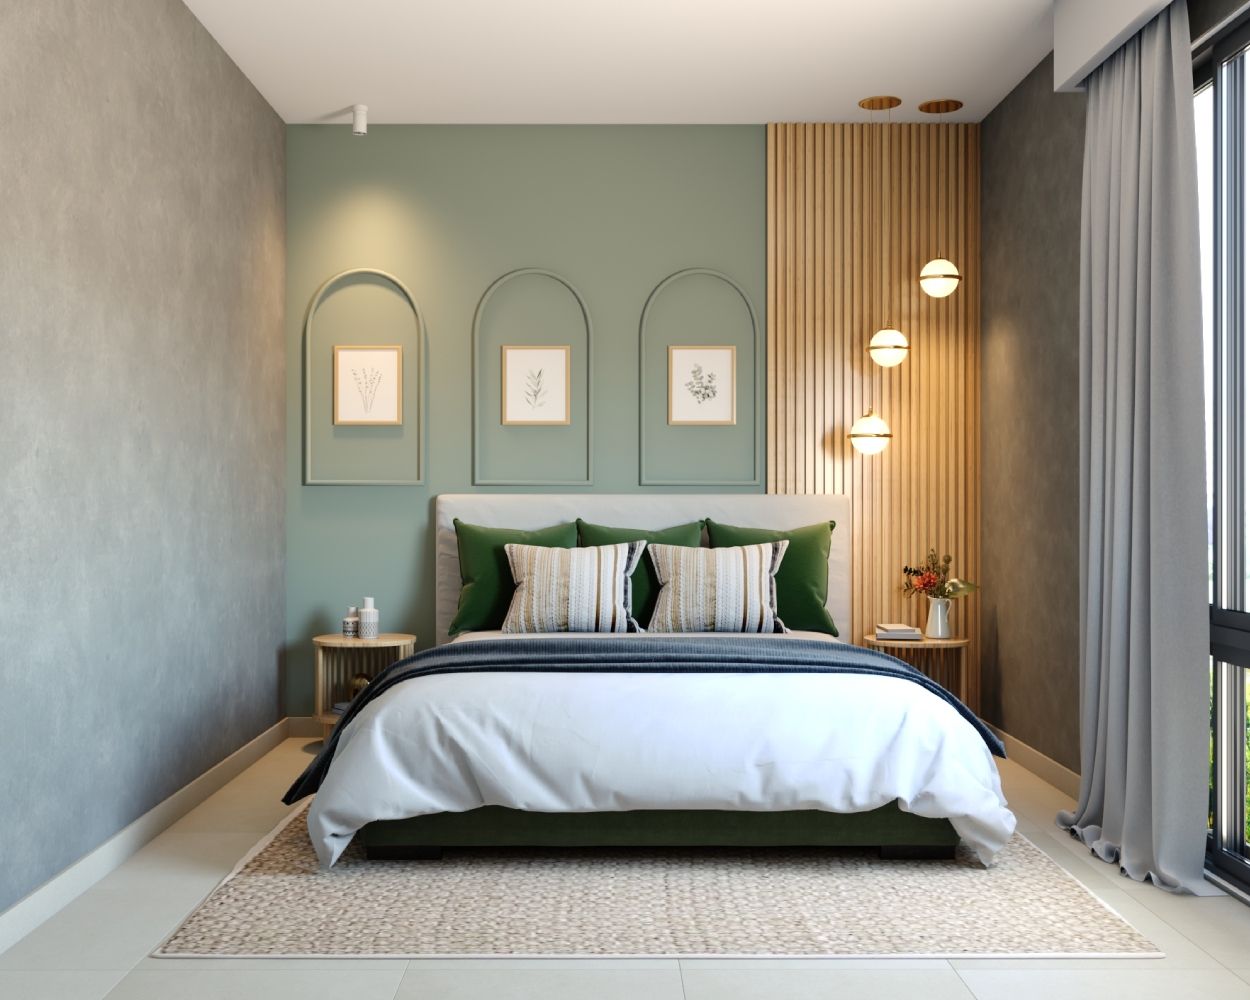 Mid-Century Modern Bedroom Wall Design With Green And Brown Wooden Wall Rafters